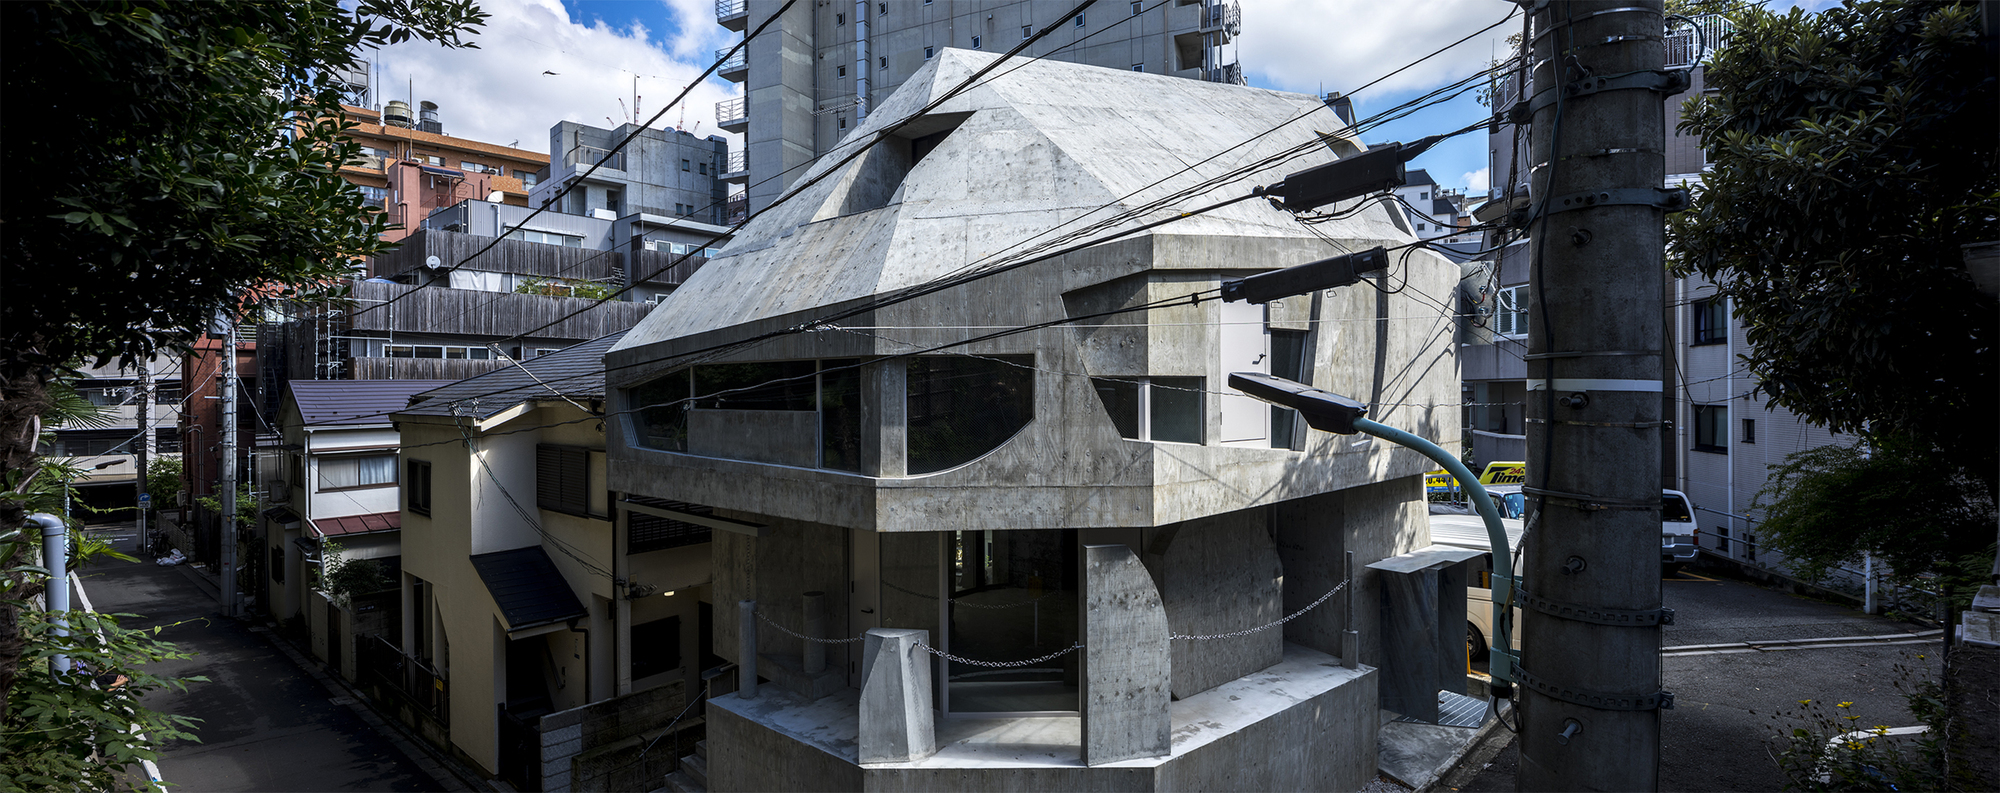 A commercial building located in Azabu has a complex terrain intertwined with plateaus and valleys